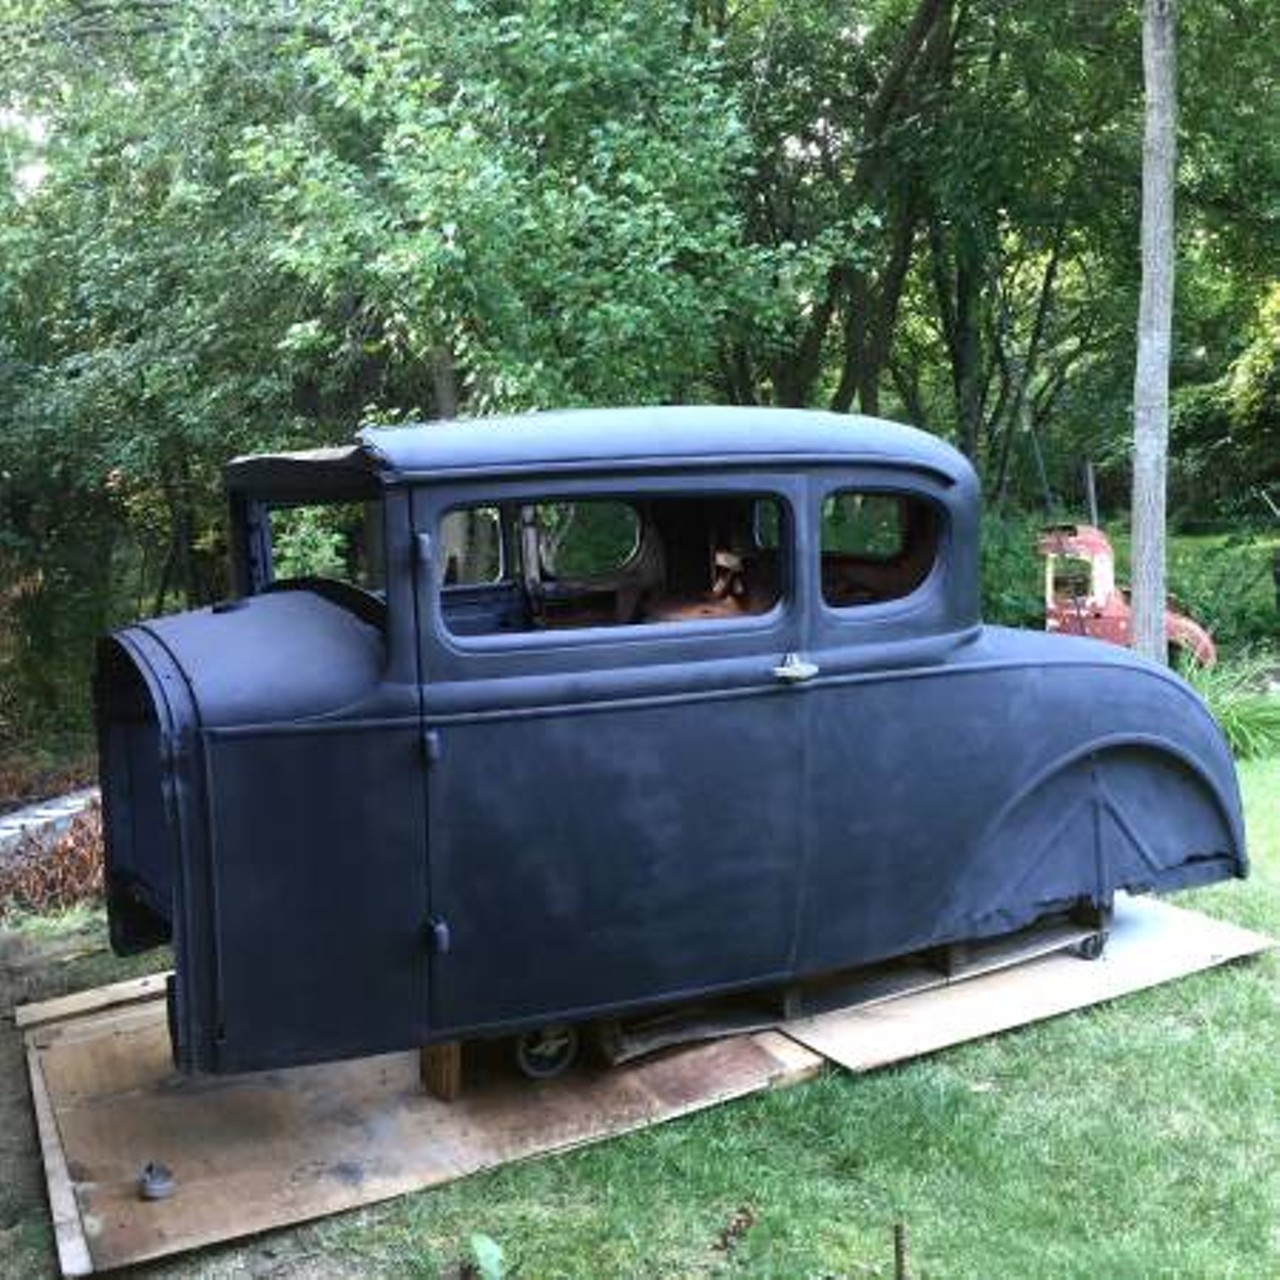 Model A Ford Coupe Body ($4,600)
Why have an entire Ford Model A when you could just have the body? 
Photo via  Craigslist